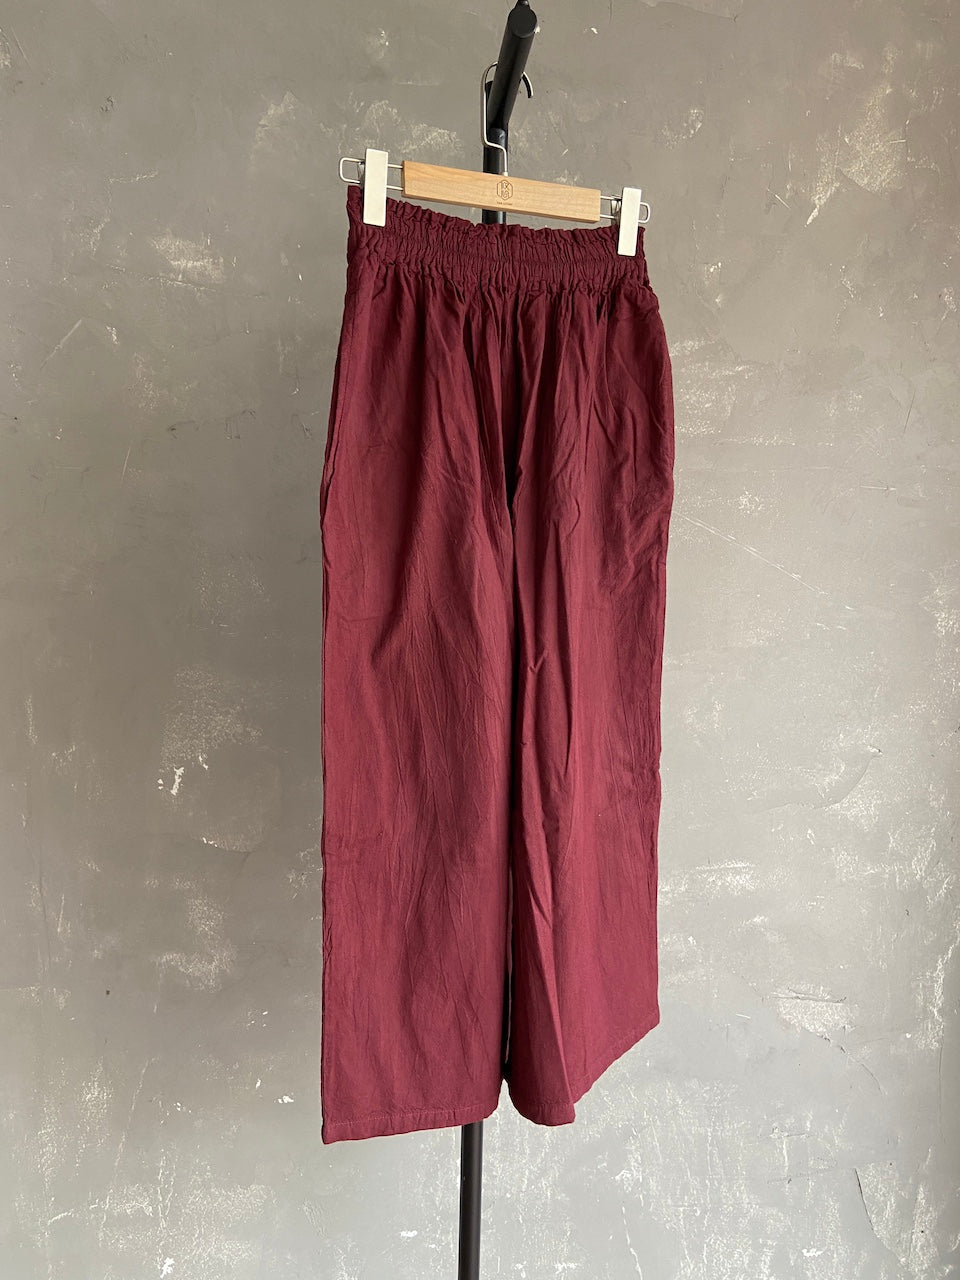 Hand Dyed Farmer's Pants in Tibetan Red